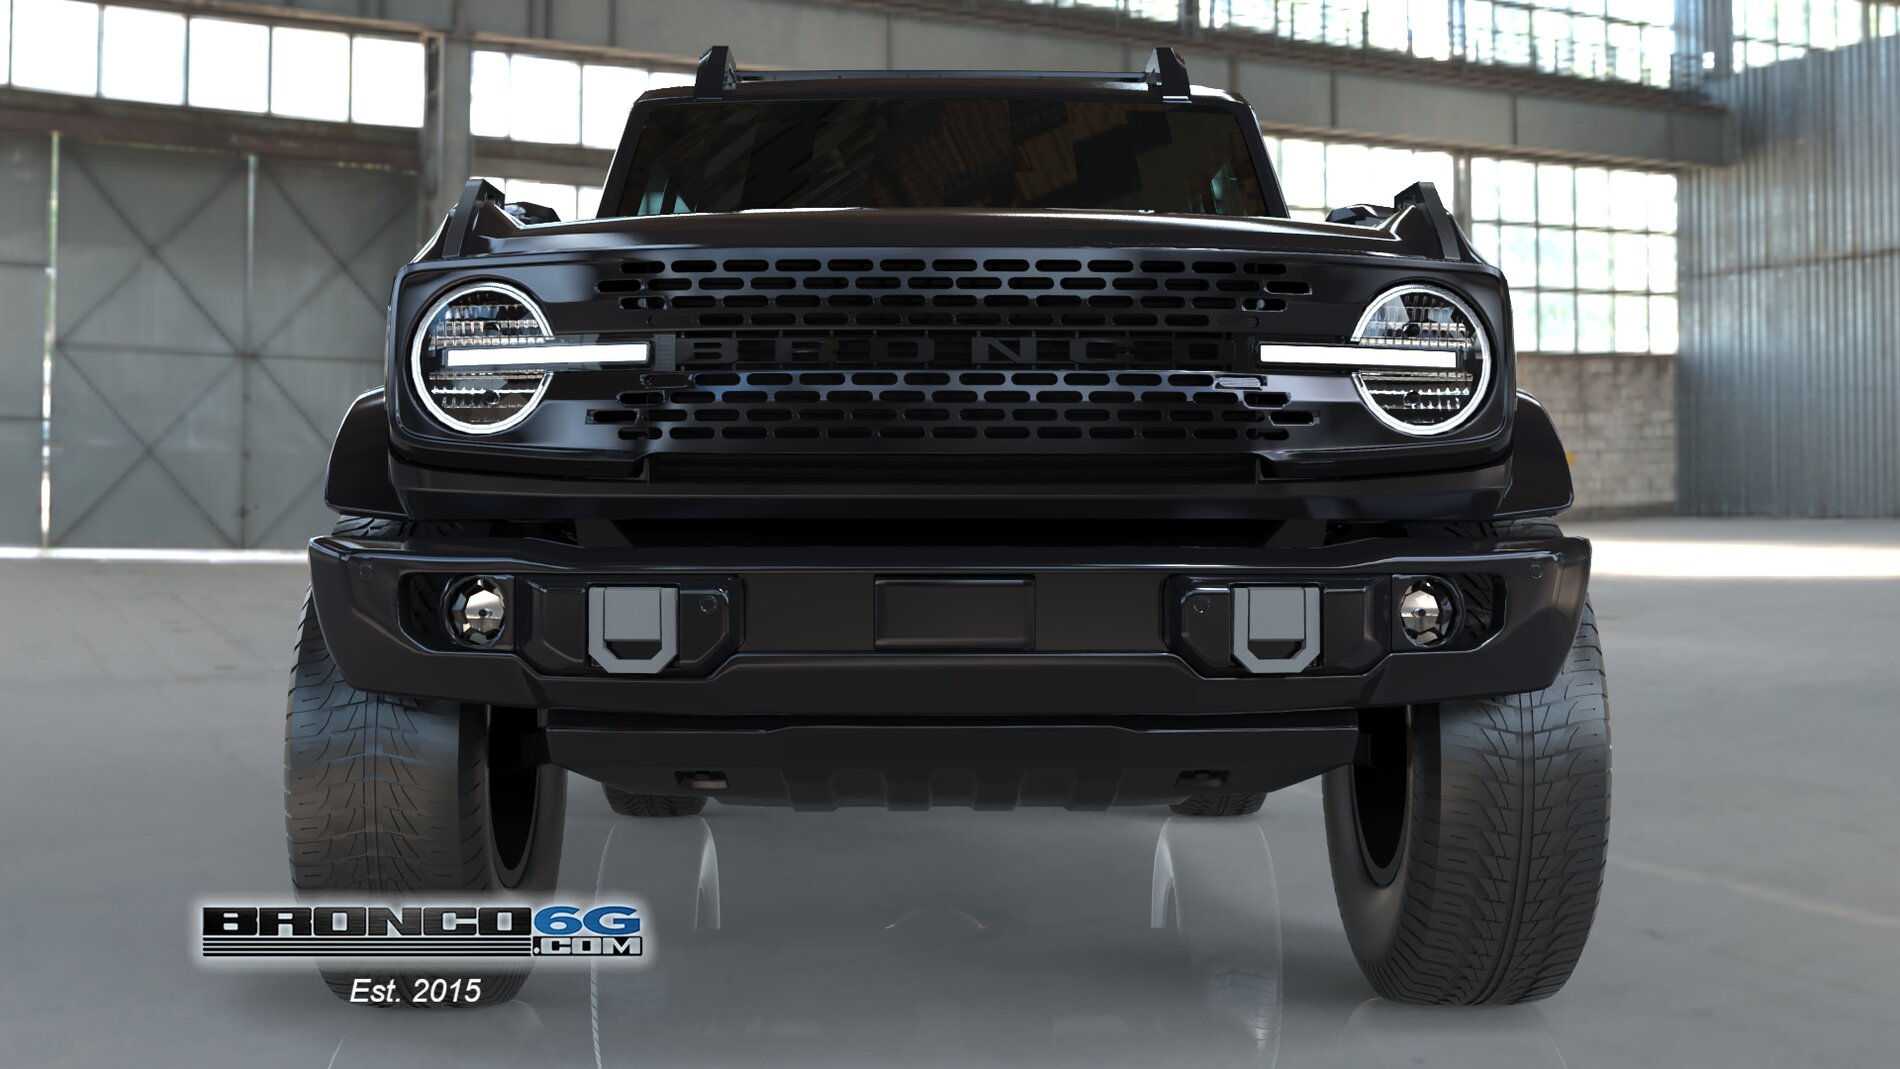 Ford Bronco Blacked Out 2021 Bronco With Satin / Matte Wrap Rendered Look Blacked Out 2021 Bronco Satin Matte Vinyl Wrap 2